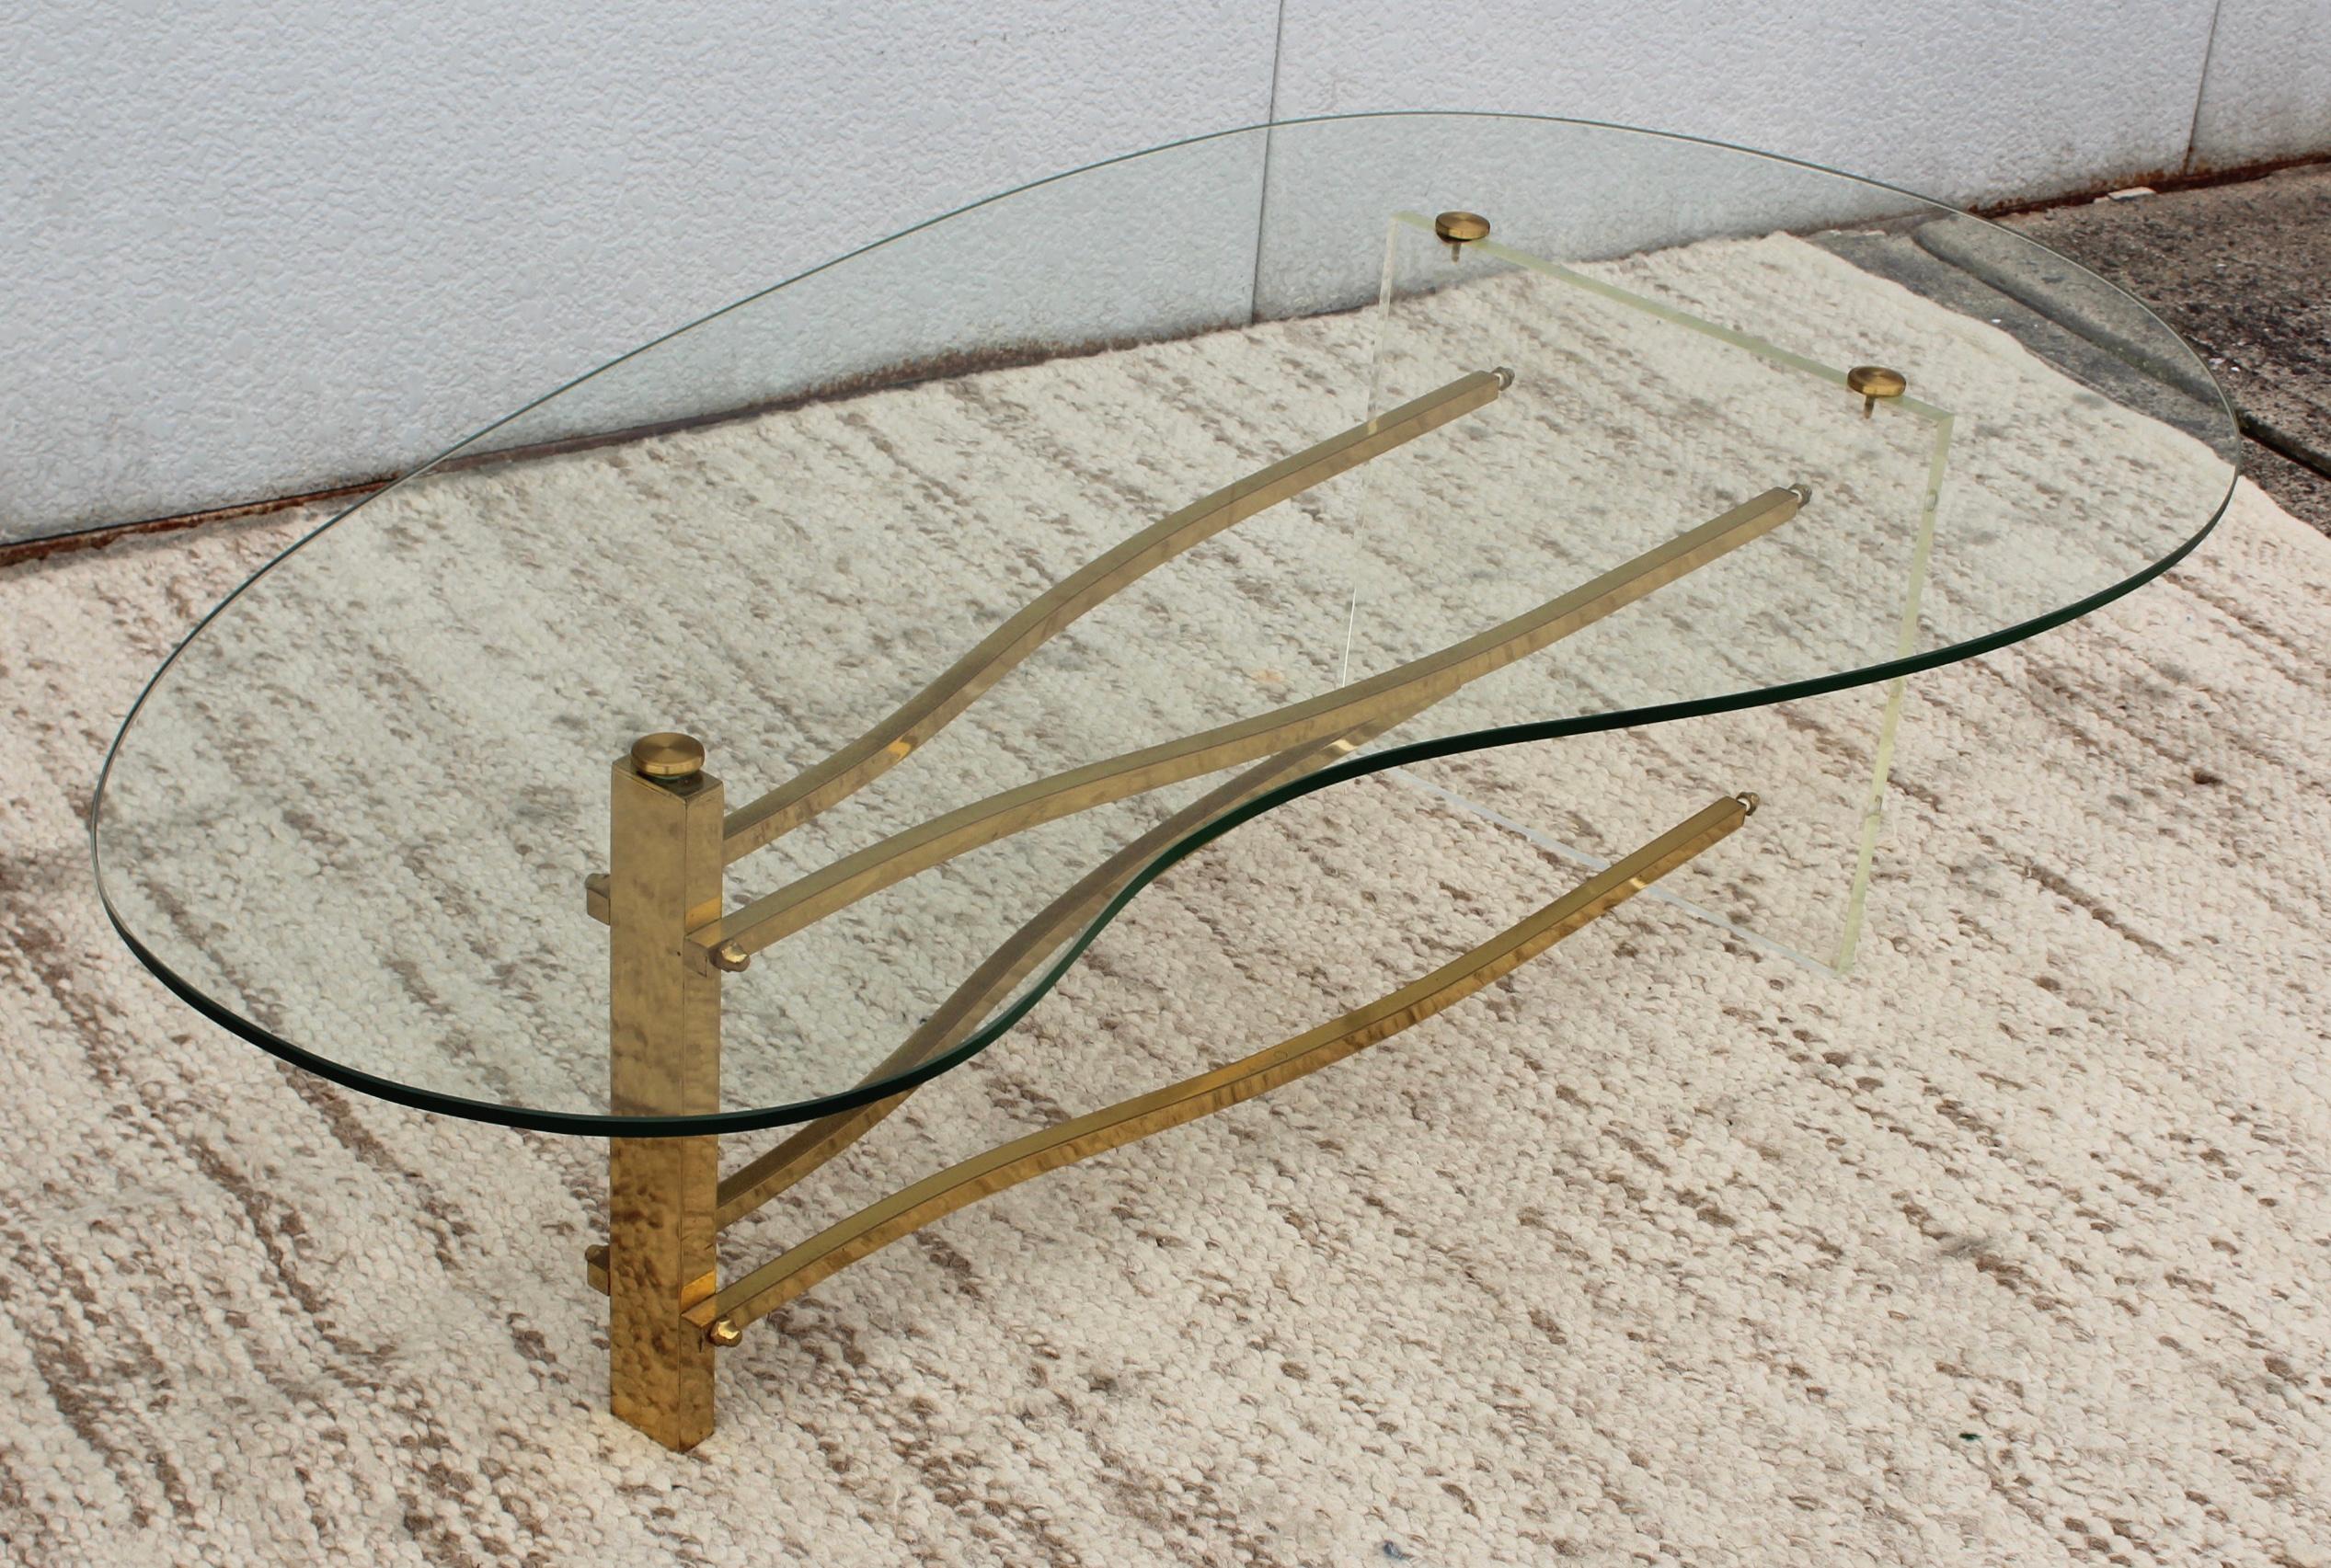 1960's Mid-Century Modern kidney shape with brass and lucite base coffee table by Charles Hollis Jones, in vintage original condition with some wear and patina due to age and use.